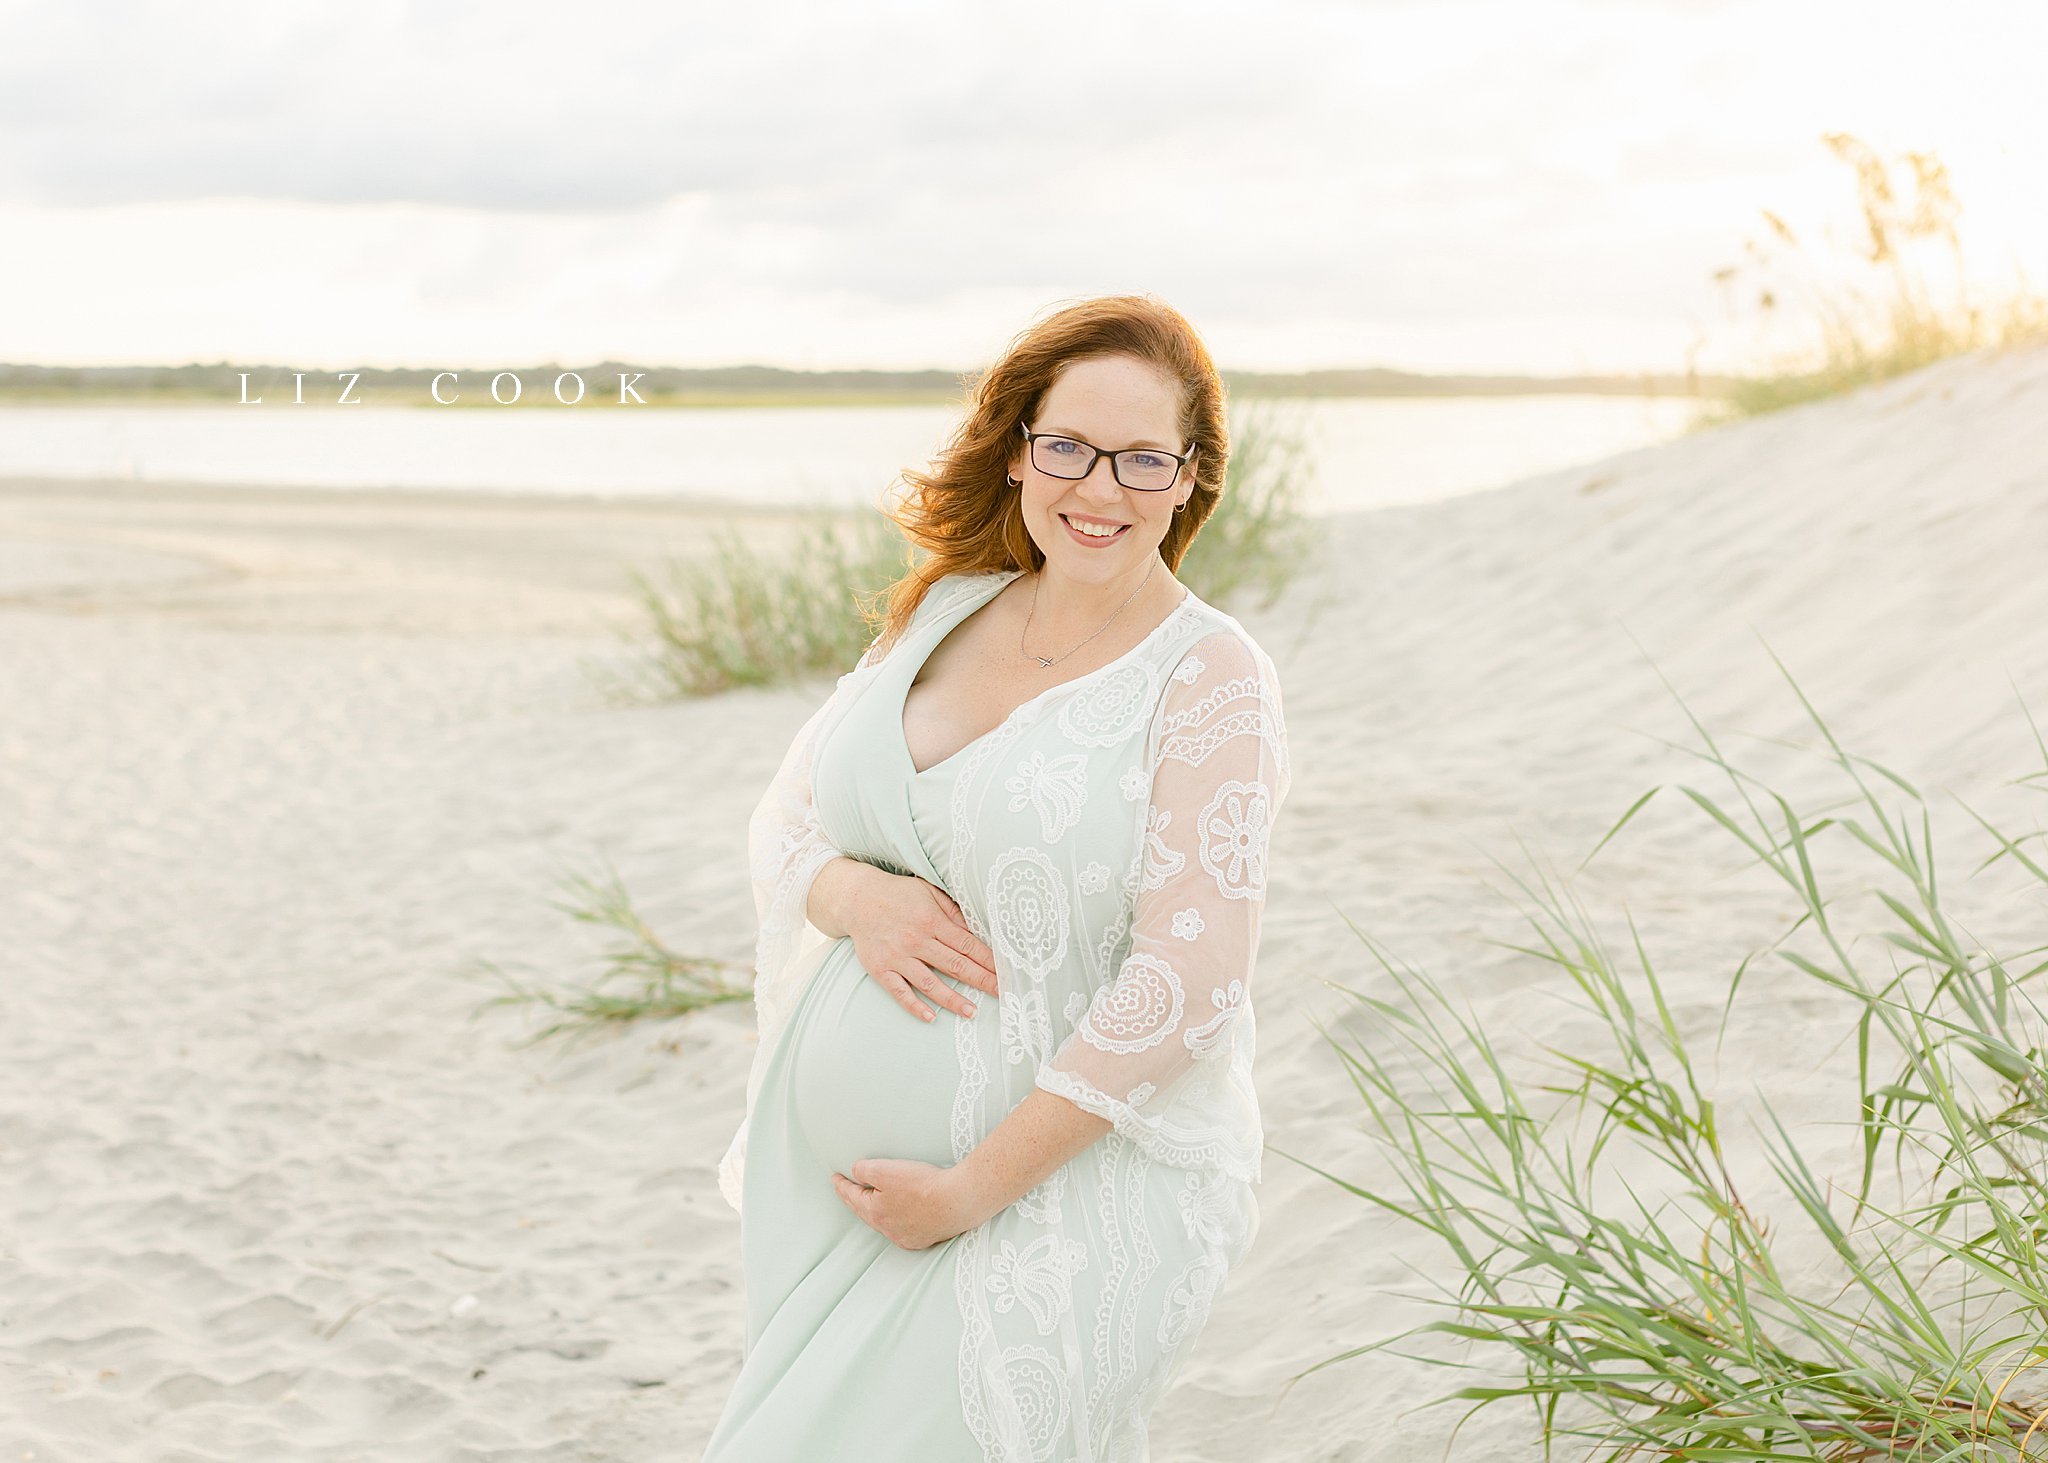 maternity-pictures-on-beach-liz-cook-photography-caroline-jean-photography_0010.jpg